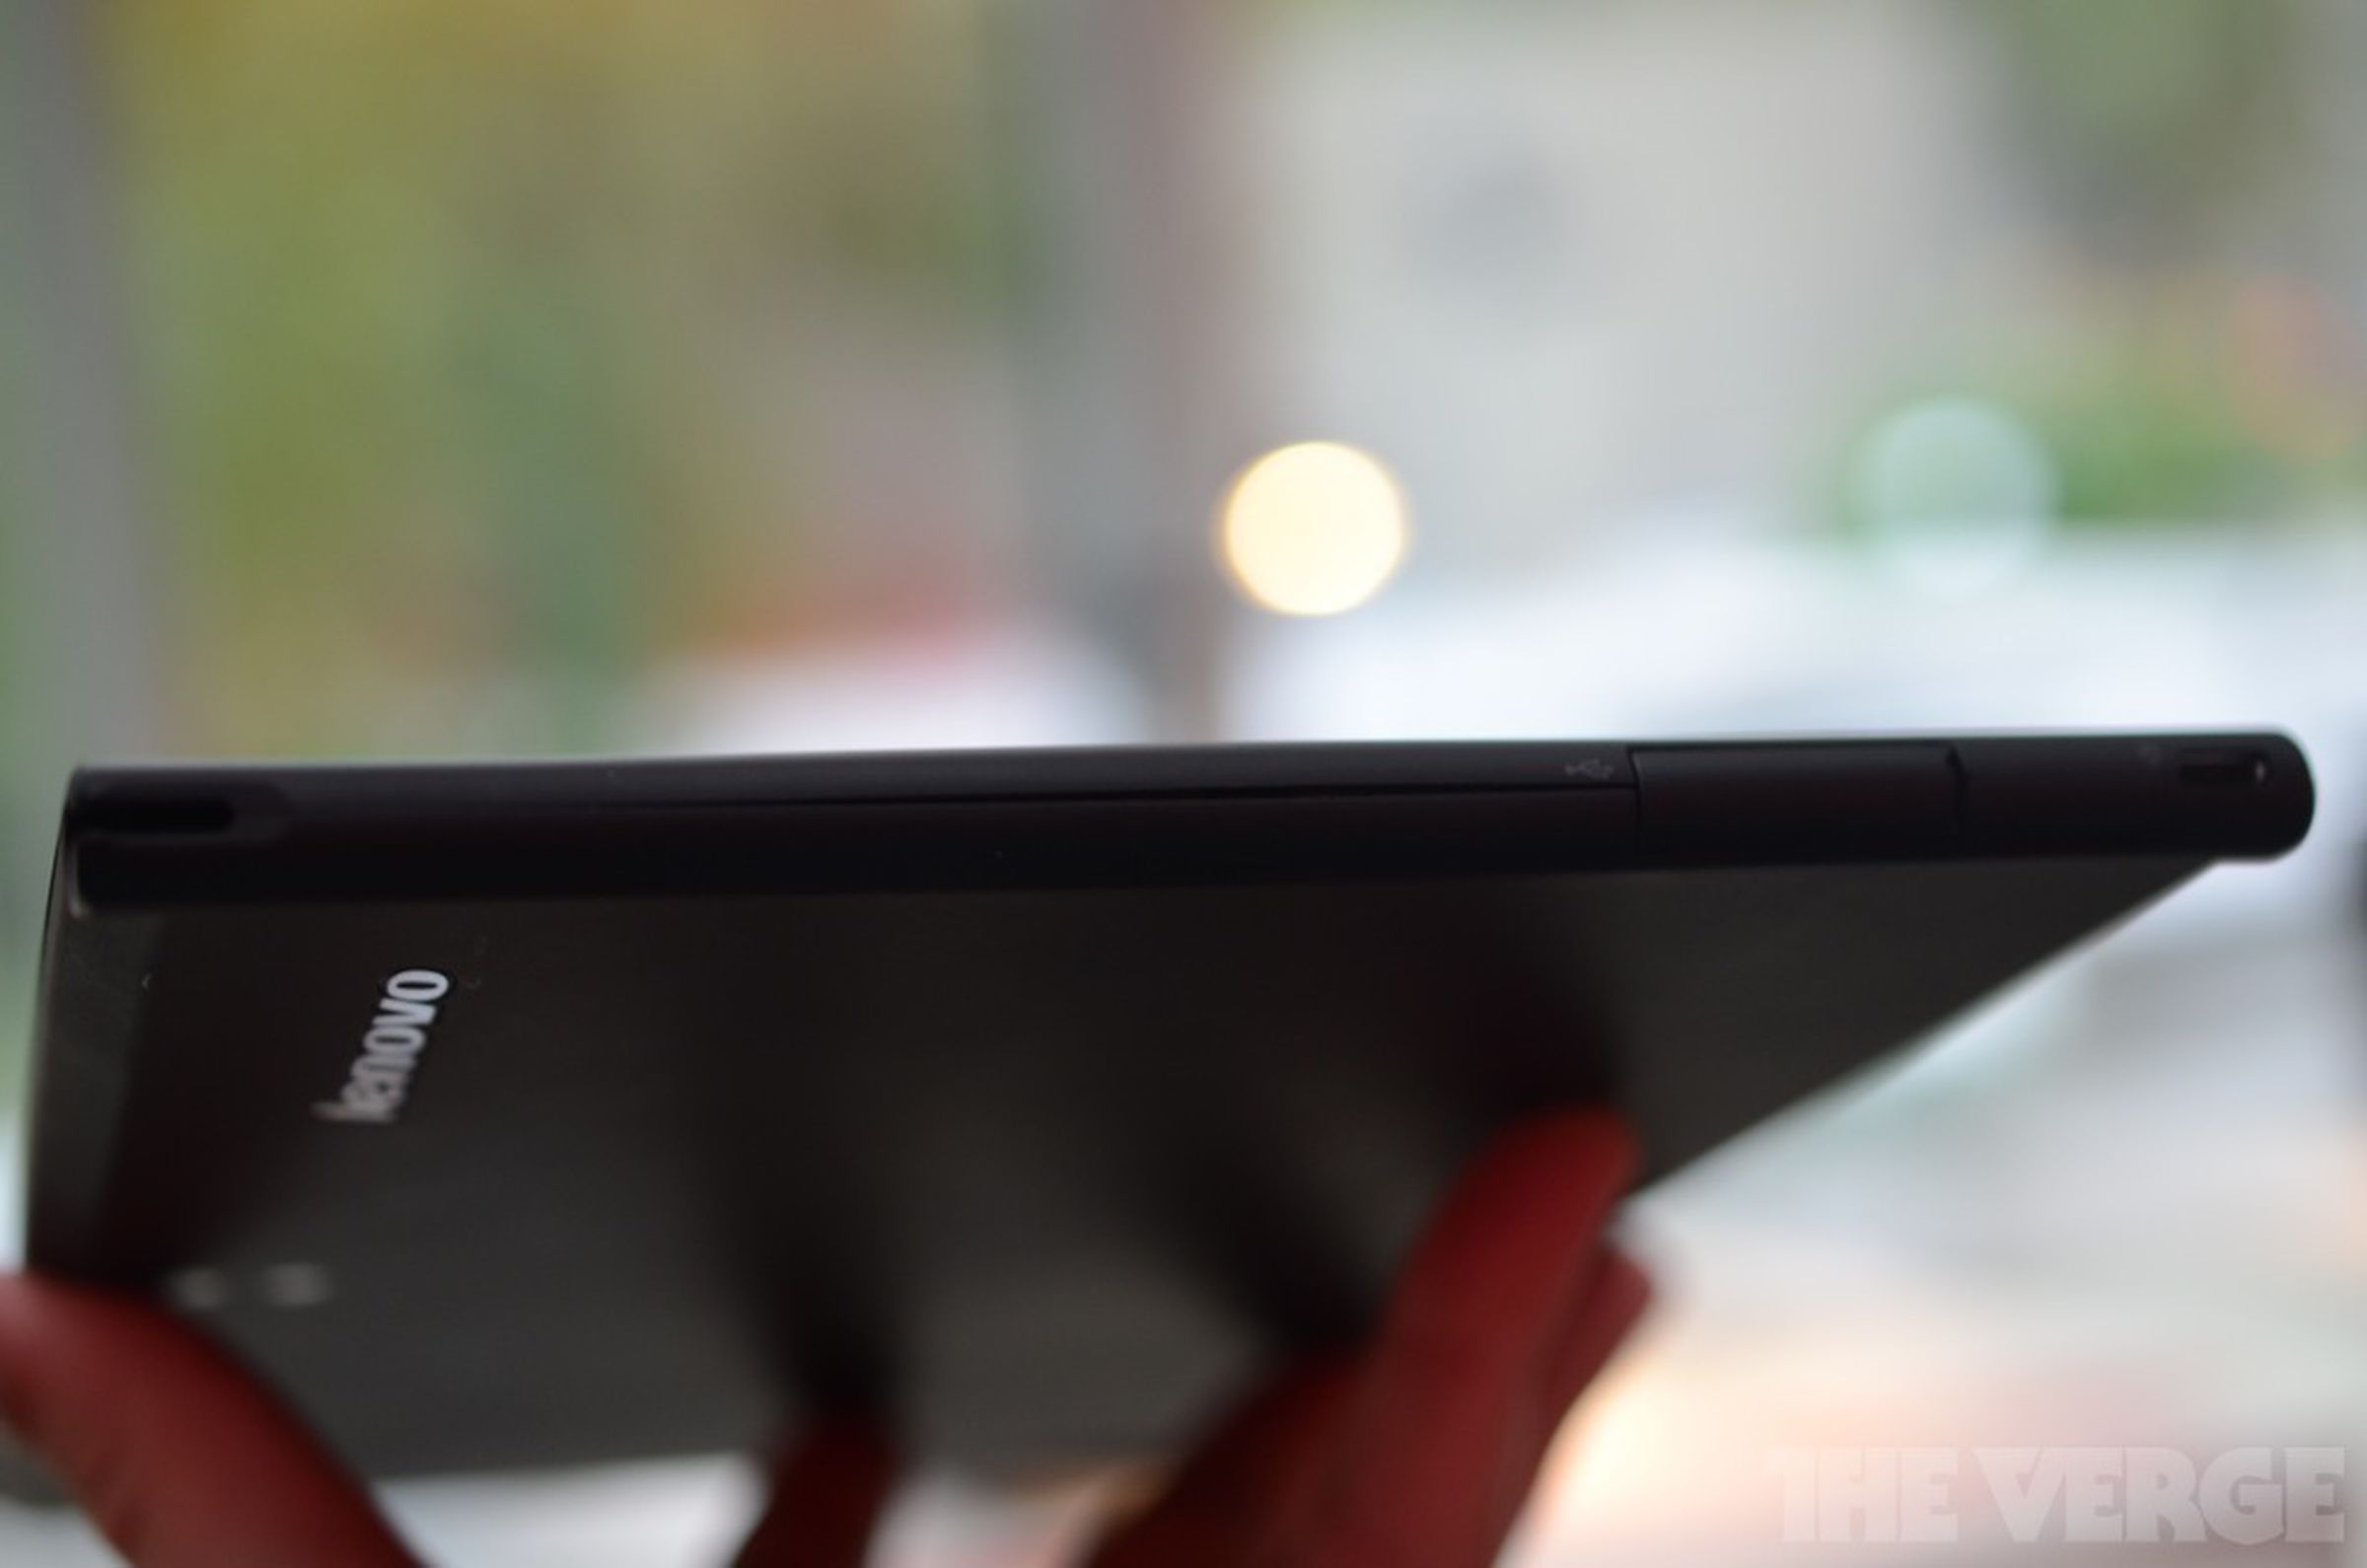 Lenovo ThinkPad Tablet 2 pictures